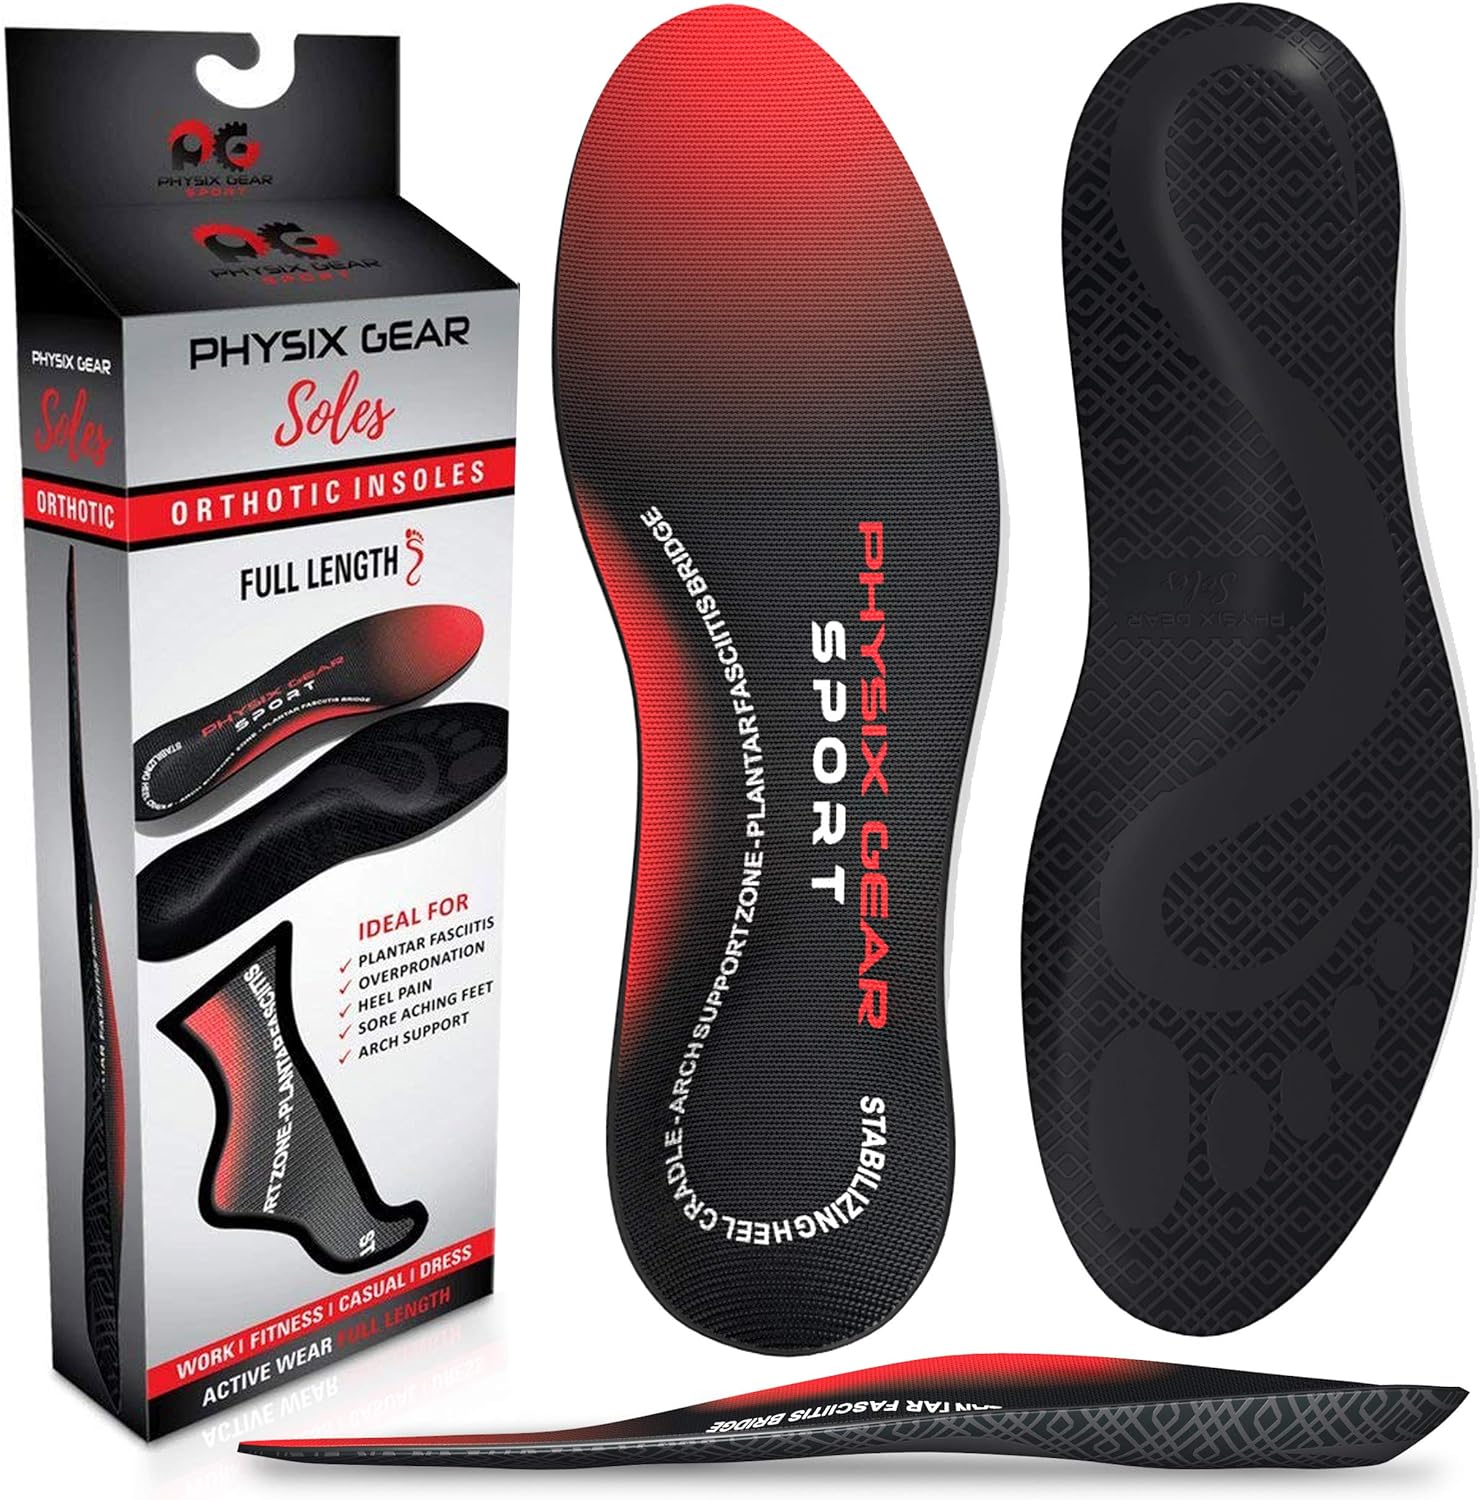 Physix Gear Plantar Fasciitis Feet Insoles Arch Supports Orthotics Inserts Relieve Flat Feet, High Arch - M